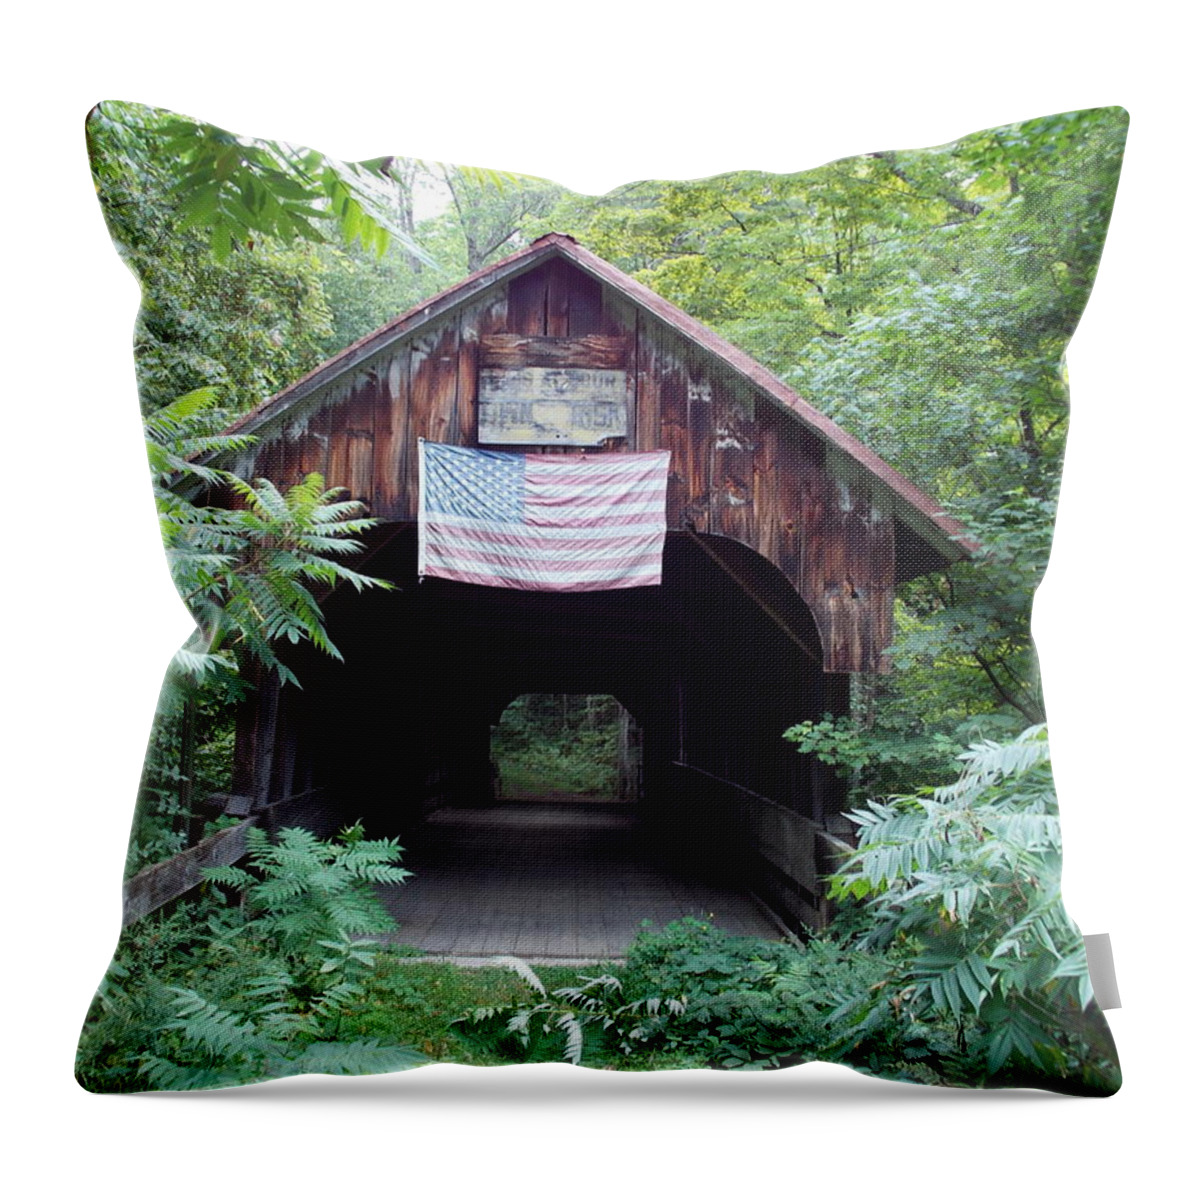 Covered Bridges Throw Pillow featuring the photograph Lost in the Woods by Catherine Gagne